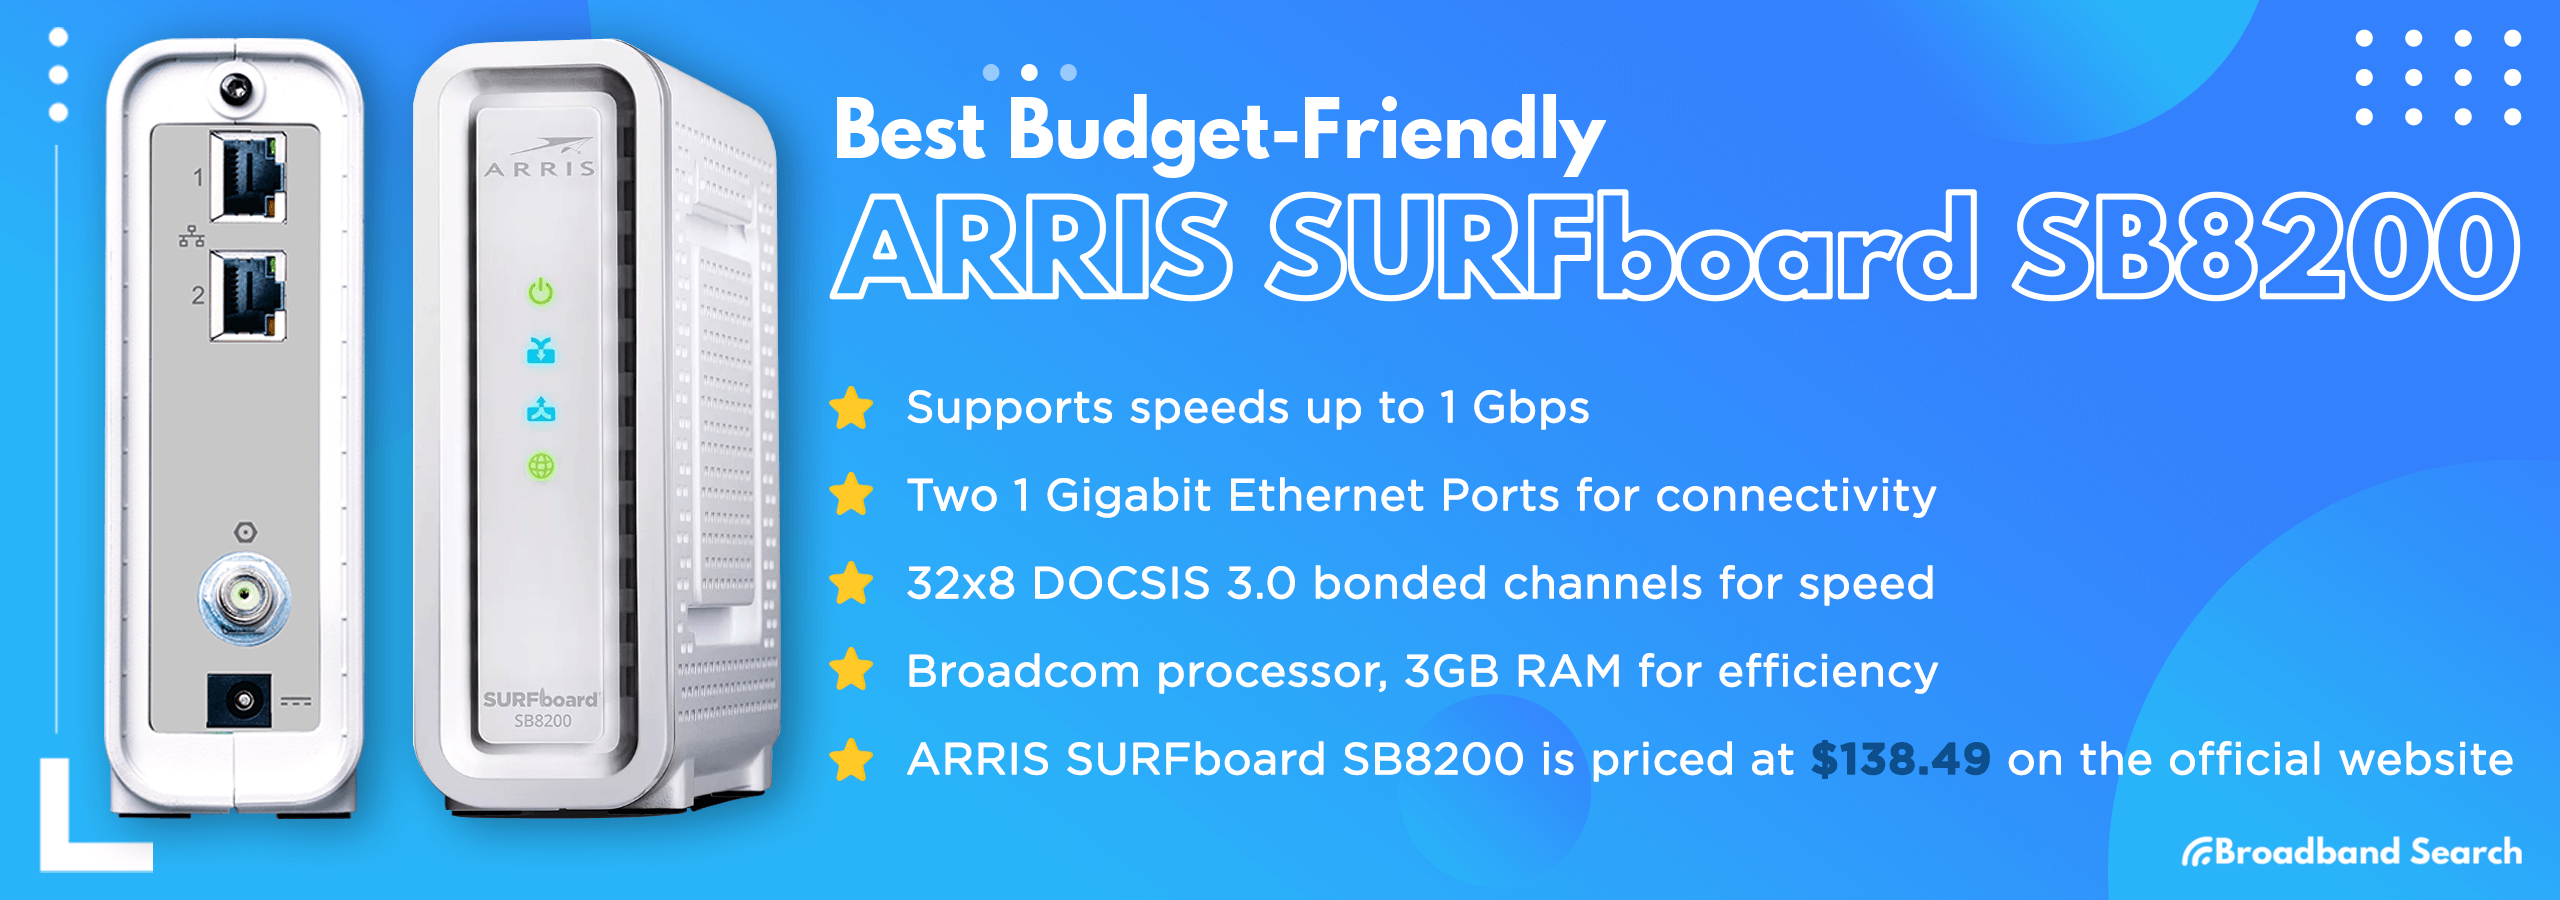 Best Budget Friendly modem, ARRIS SURFboard SB8200, with included product details